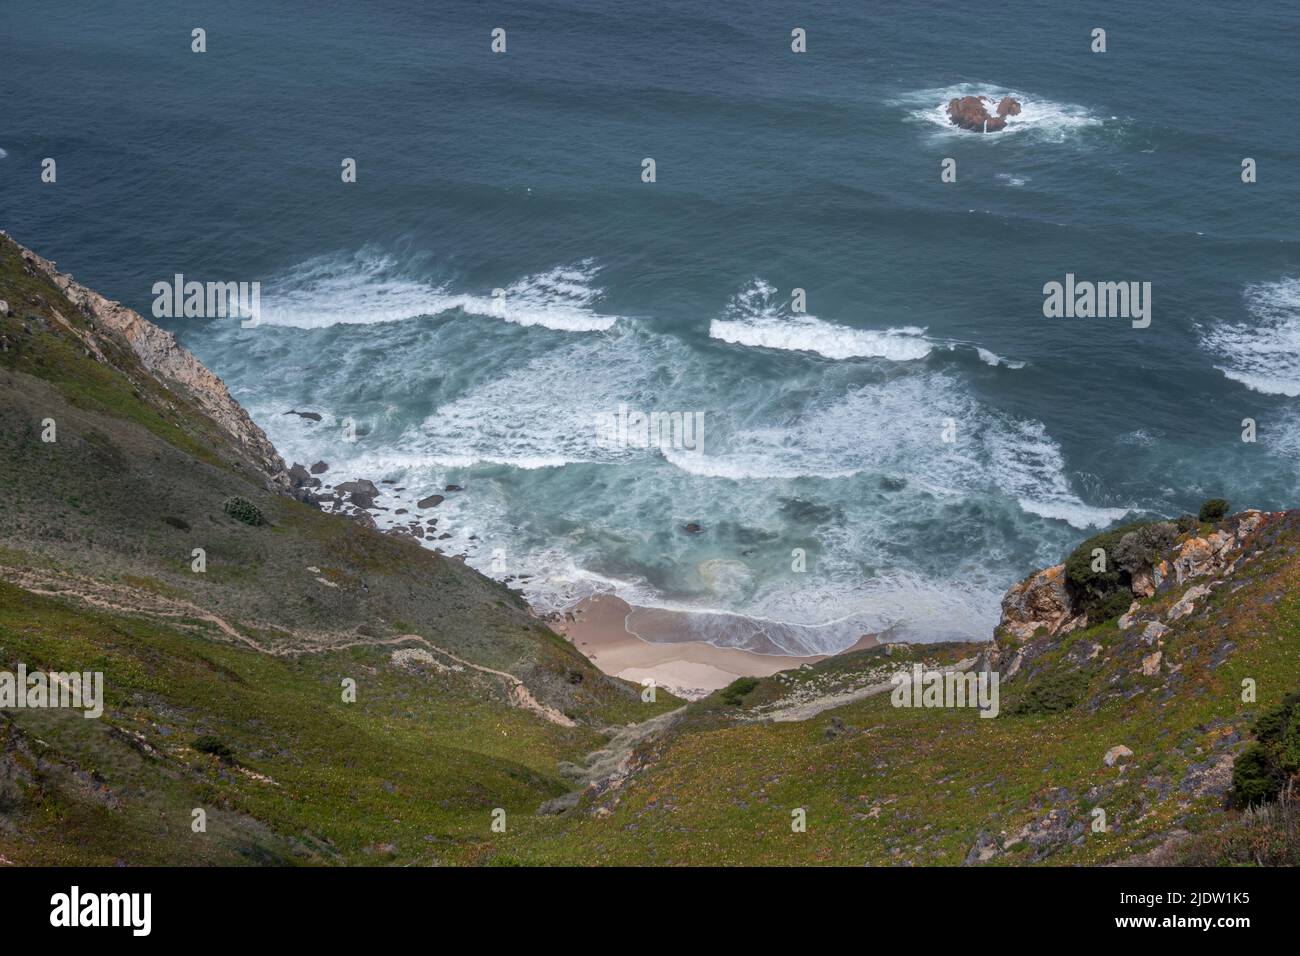 View from above of the descent over cliffs to Praia da Aroeira on the Atlantic coast in Portugal Stock Photo